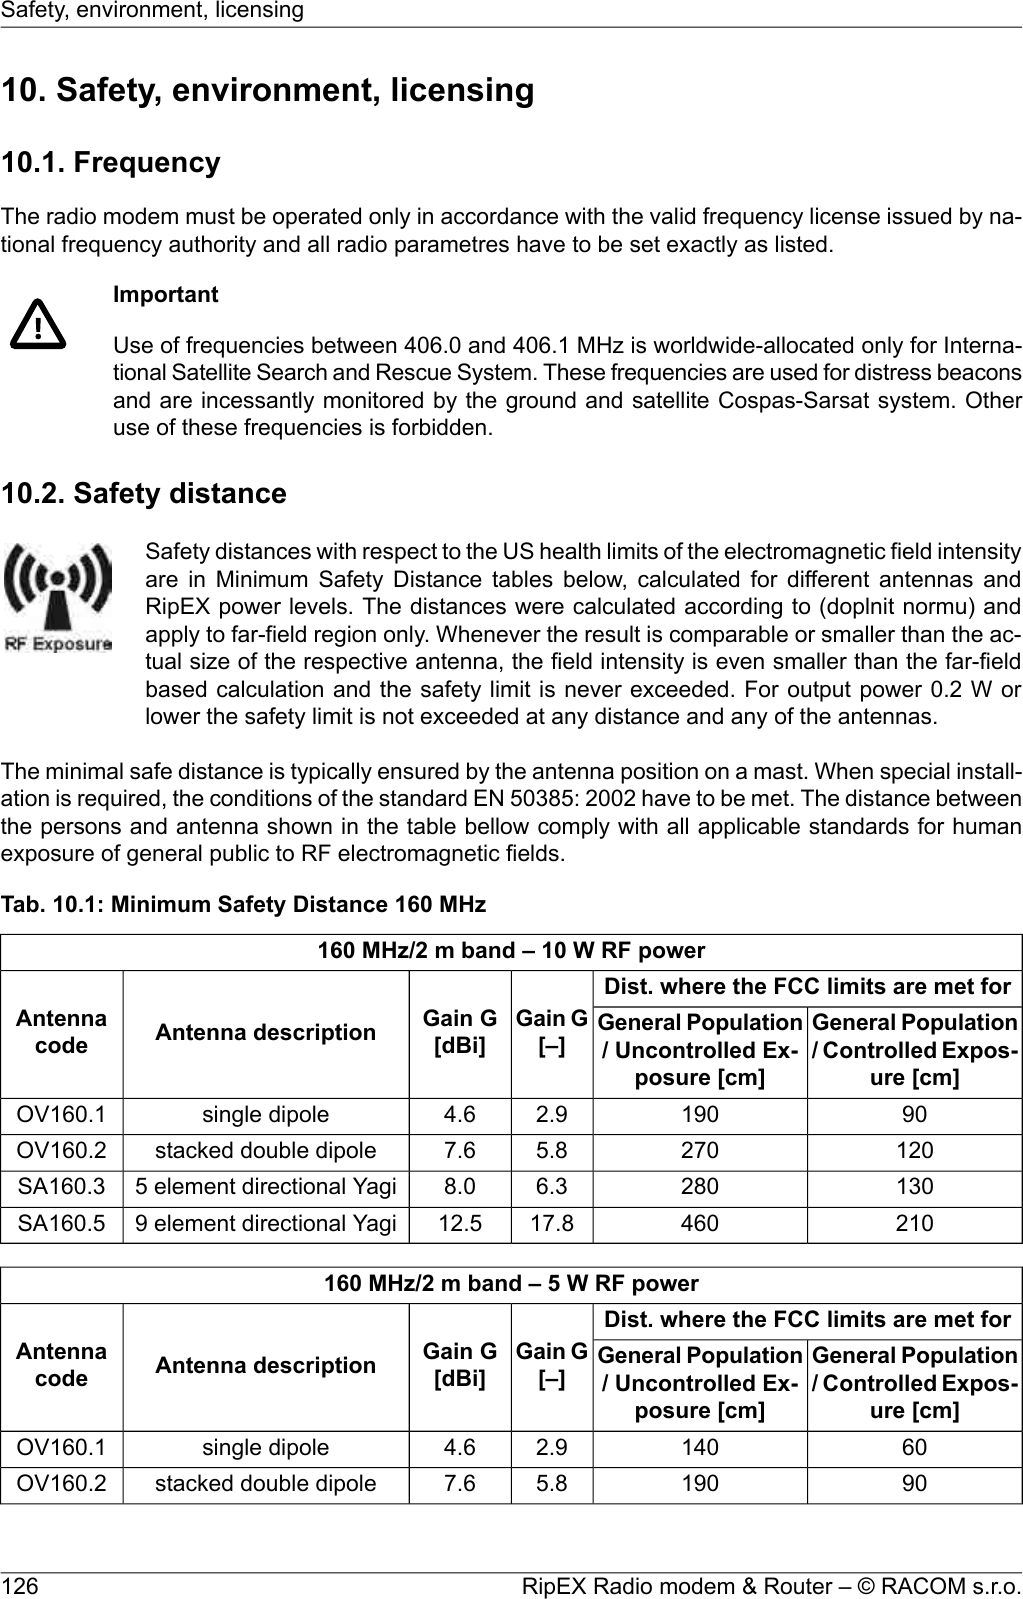 10. Safety, environment, licensing10.1. FrequencyThe radio modem must be operated only in accordance with the valid frequency license issued by na-tional frequency authority and all radio parametres have to be set exactly as listed.ImportantUse of frequencies between 406.0 and 406.1 MHz is worldwide-allocated only for Interna-tional Satellite Search and Rescue System. These frequencies are used for distress beaconsand are incessantly monitored by the ground and satellite Cospas-Sarsat system. Otheruse of these frequencies is forbidden.10.2. Safety distanceSafety distances with respect to the US health limits of the electromagnetic field intensityare in Minimum Safety Distance tables below, calculated for different antennas andRipEX power levels. The distances were calculated according to (doplnit normu) andapply to far-field region only. Whenever the result is comparable or smaller than the ac-tual size of the respective antenna, the field intensity is even smaller than the far-fieldbased calculation and the safety limit is never exceeded. For output power 0.2 W orlower the safety limit is not exceeded at any distance and any of the antennas.The minimal safe distance is typically ensured by the antenna position on a mast. When special install-ation is required, the conditions of the standard EN 50385: 2002 have to be met. The distance betweenthe persons and antenna shown in the table bellow comply with all applicable standards for humanexposure of general public to RF electromagnetic fields.Tab. 10.1: Minimum Safety Distance 160 MHz160 MHz/2 m band – 10 W RF powerDist. where the FCC limits are met forGain G[–]Gain G[dBi]Antenna descriptionAntennacodeGeneral Population/ Controlled Expos-ure [cm]General Population/ Uncontrolled Ex-posure [cm]901902.94.6single dipoleOV160.11202705.87.6stacked double dipoleOV160.21302806.38.05 element directional YagiSA160.321046017.812.59 element directional YagiSA160.5160 MHz/2 m band – 5 W RF powerDist. where the FCC limits are met forGain G[–]Gain G[dBi]Antenna descriptionAntennacodeGeneral Population/ Controlled Expos-ure [cm]General Population/ Uncontrolled Ex-posure [cm]601402.94.6single dipoleOV160.1901905.87.6stacked double dipoleOV160.2RipEX Radio modem &amp; Router – © RACOM s.r.o.126Safety, environment, licensing